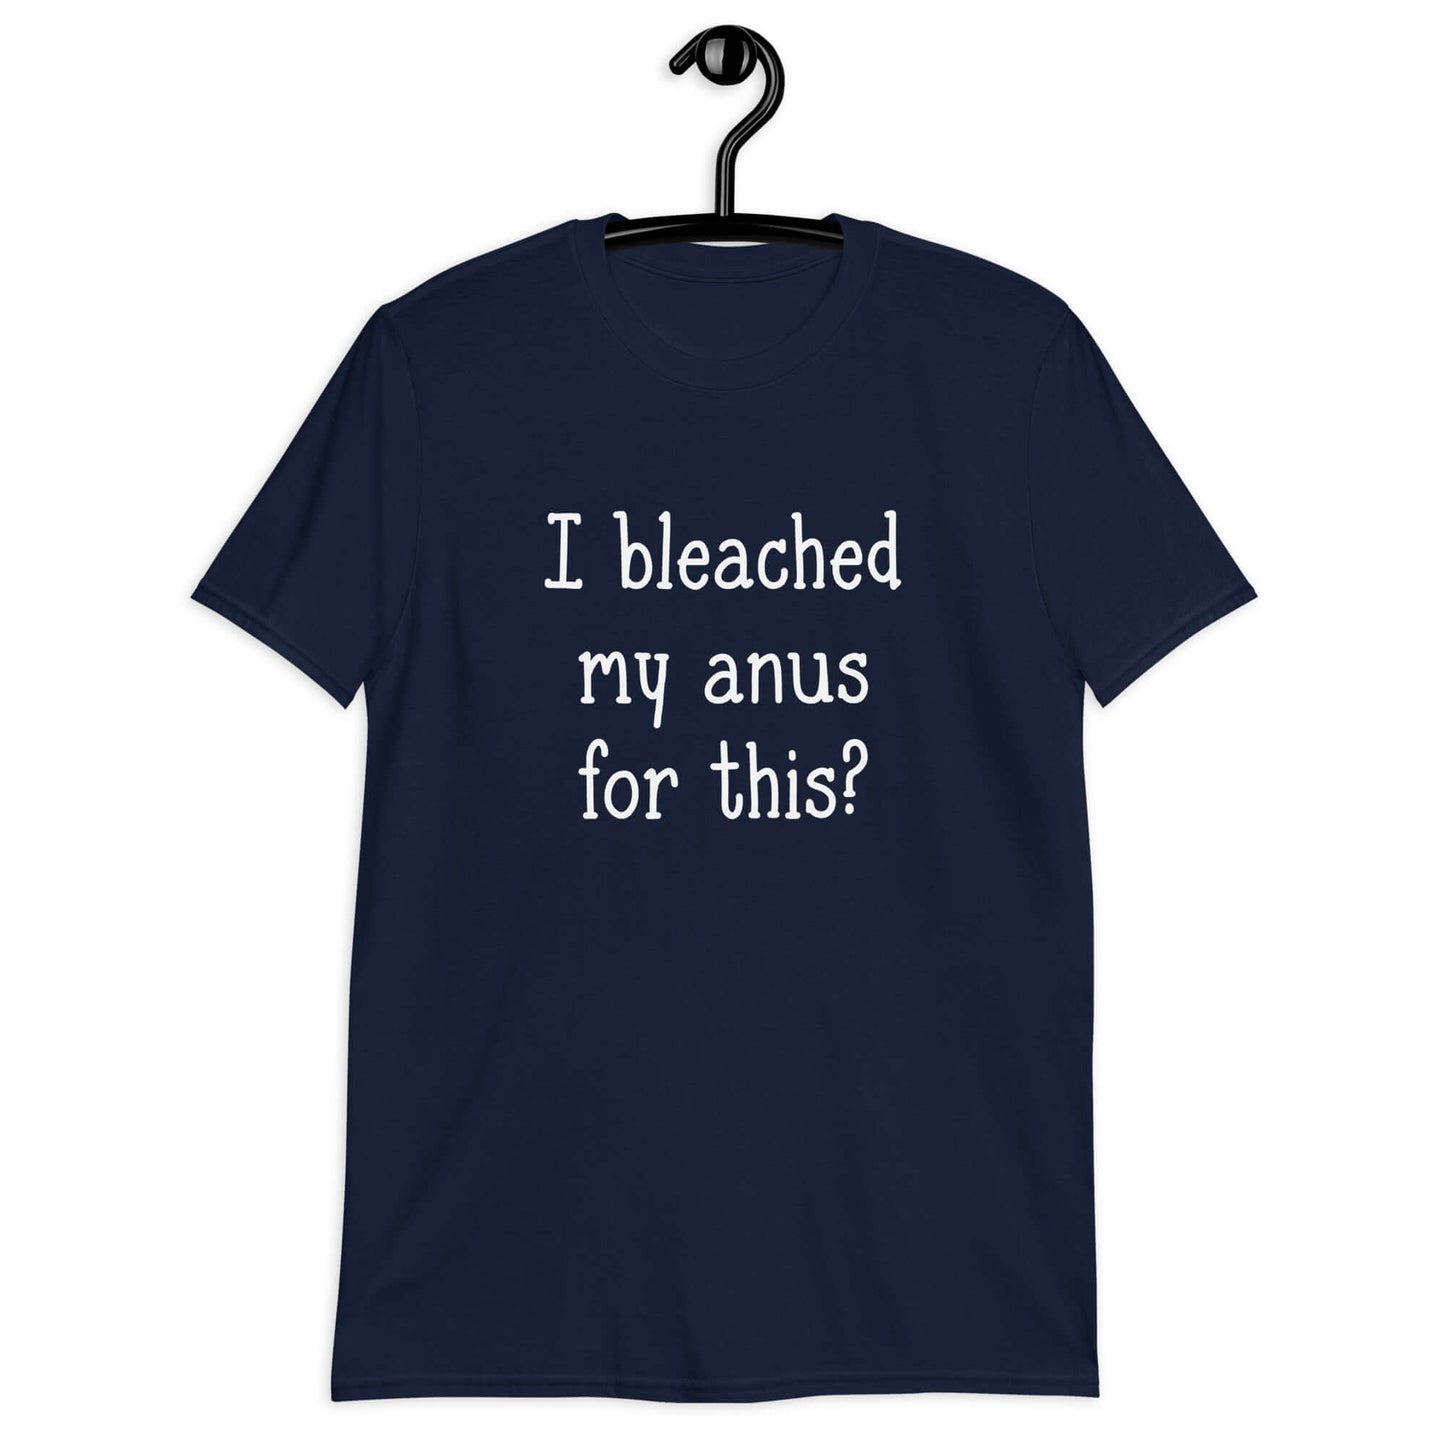 navy blue t-shirt that has "I bleached my anus for this?" printed on the front